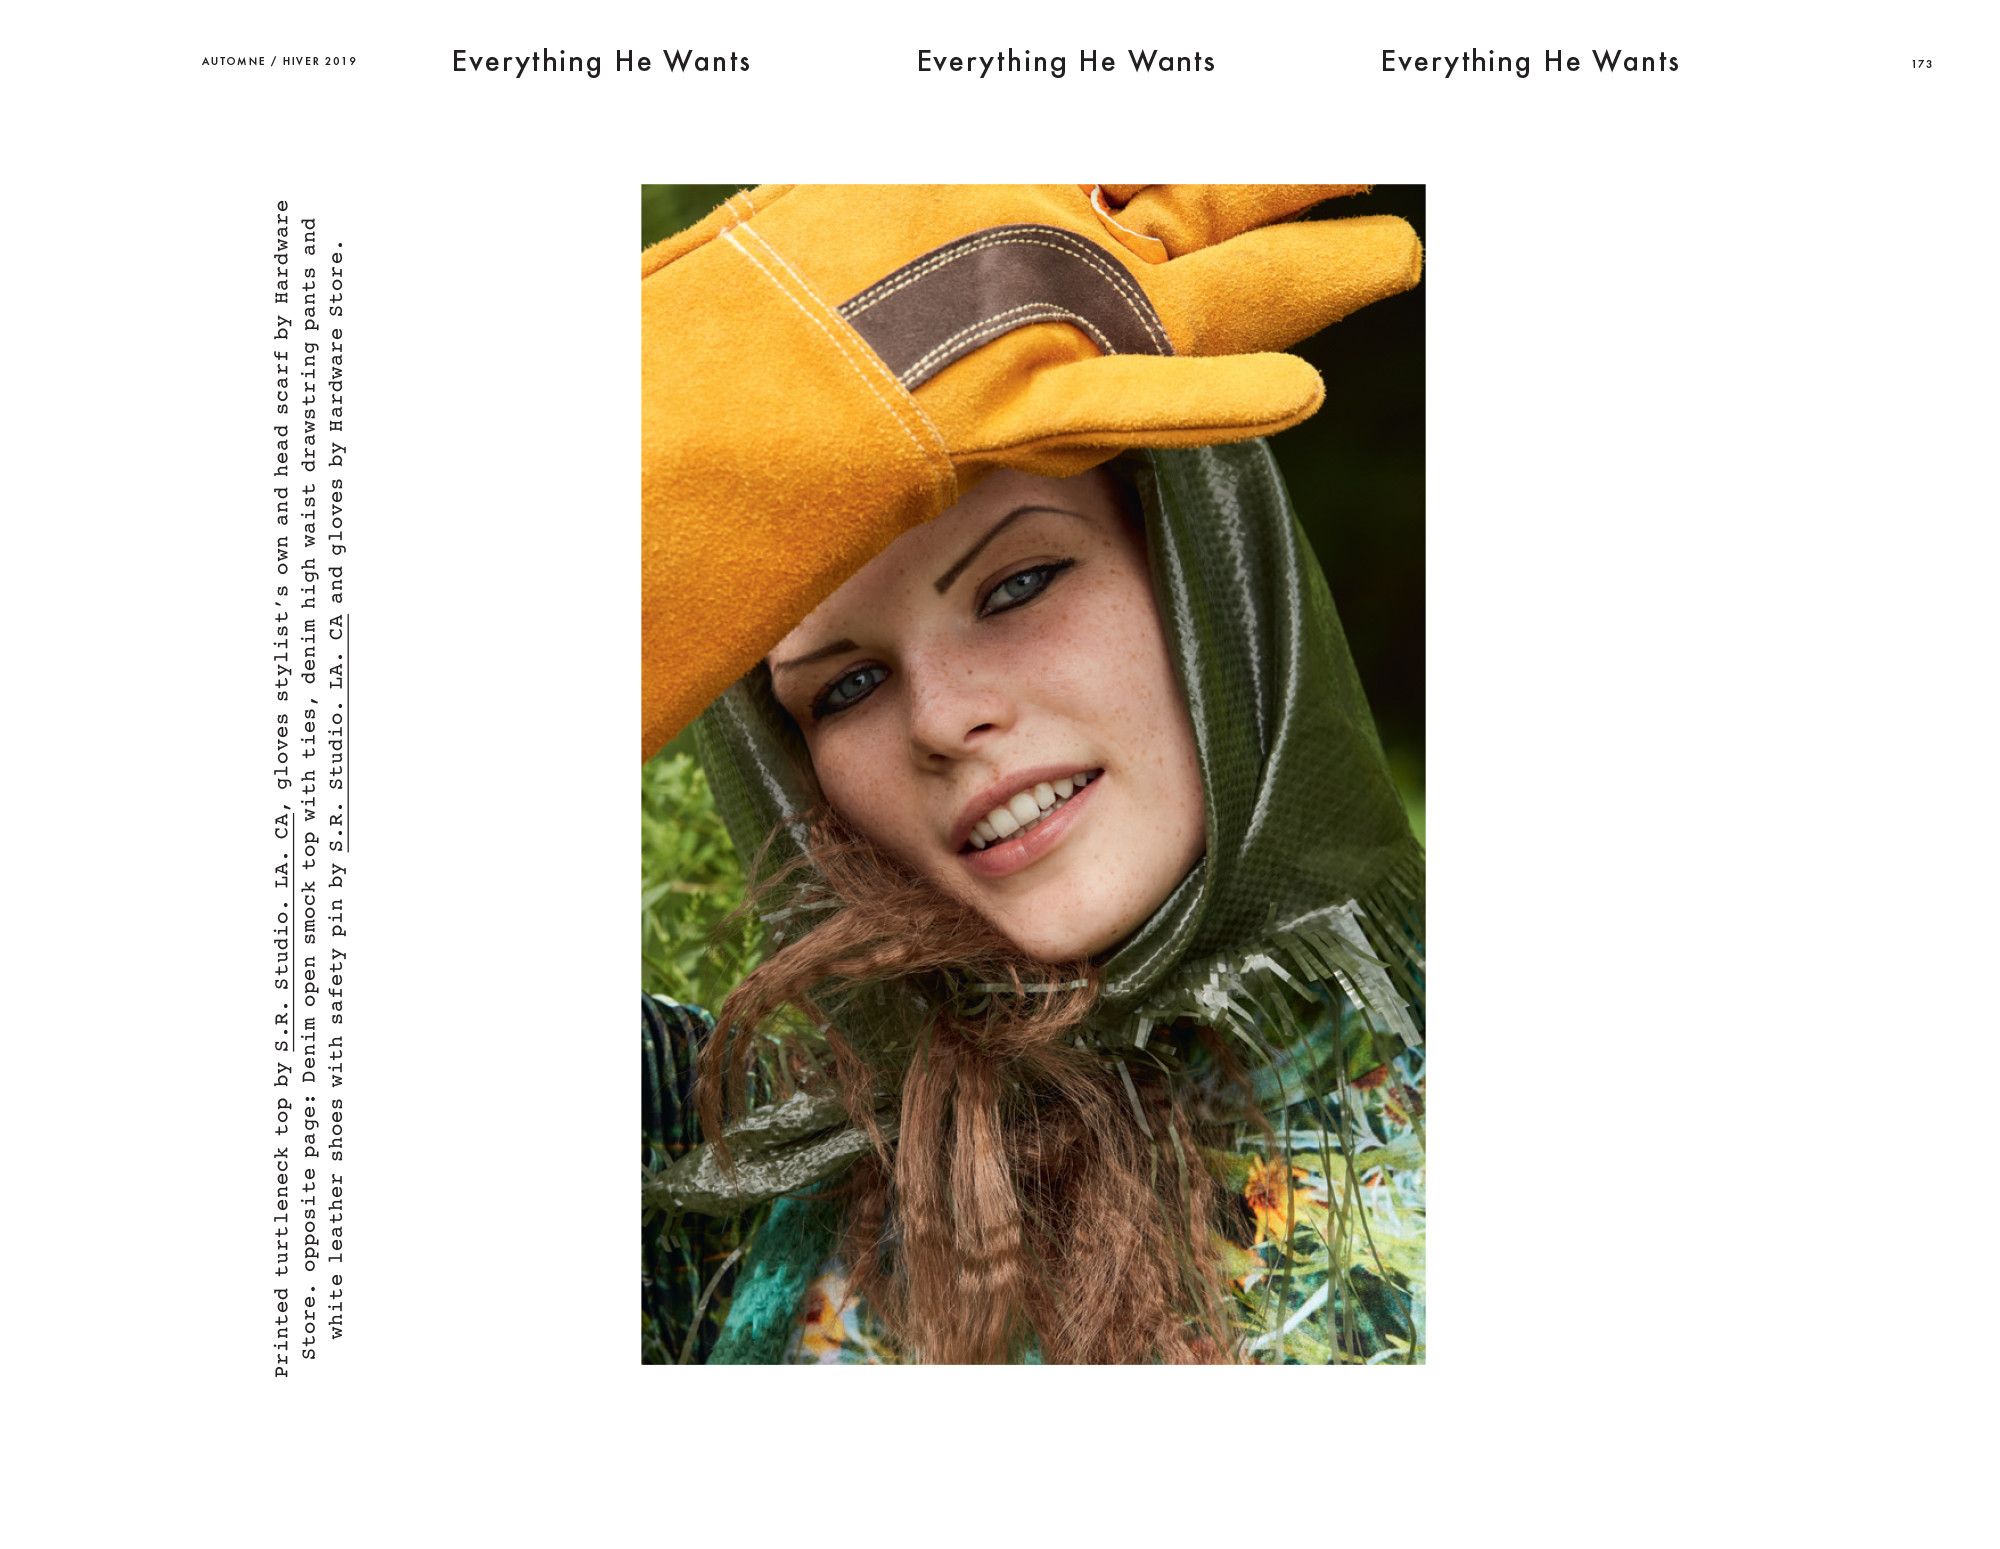 Double Magazine - Sterling Ruby / Roe ethridge styled by Sabina Schreder